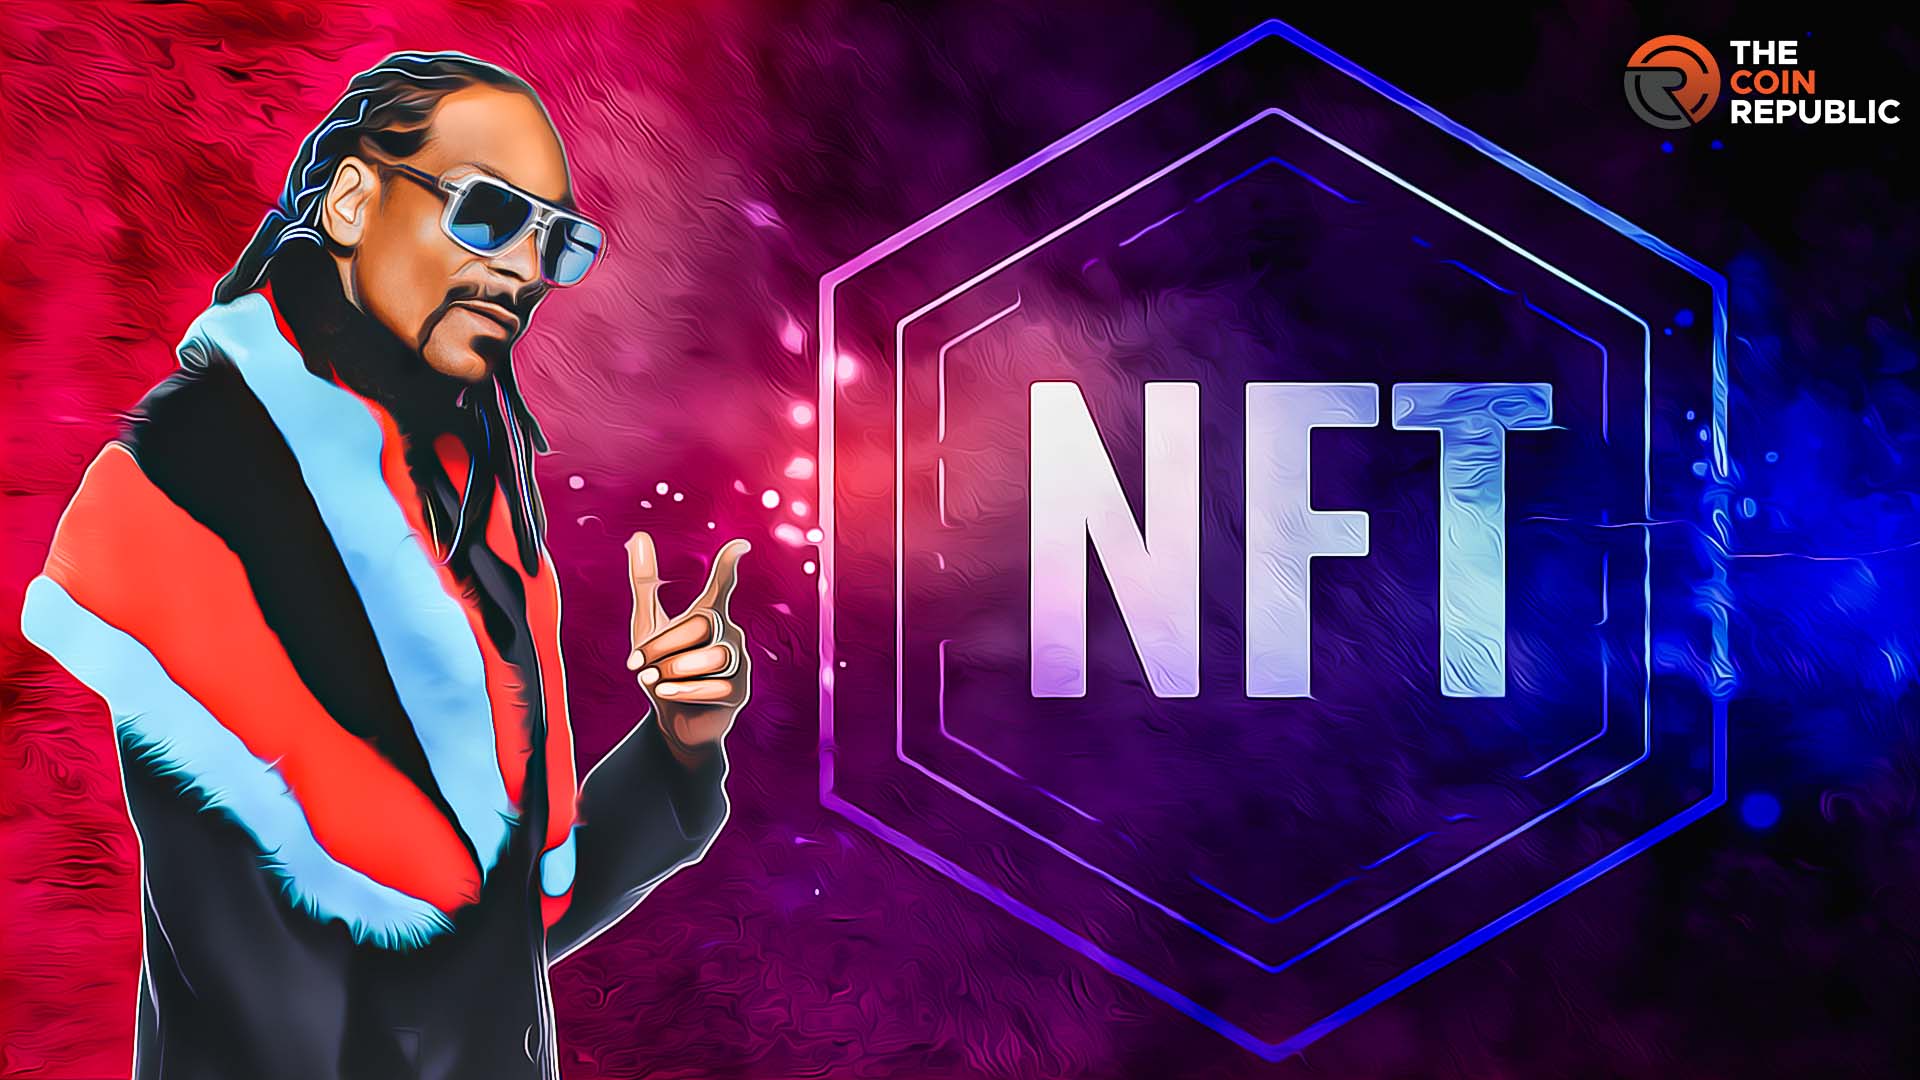 Snoop Dogg NFT entices the audience with behind-the-scenes offers from the latest tour